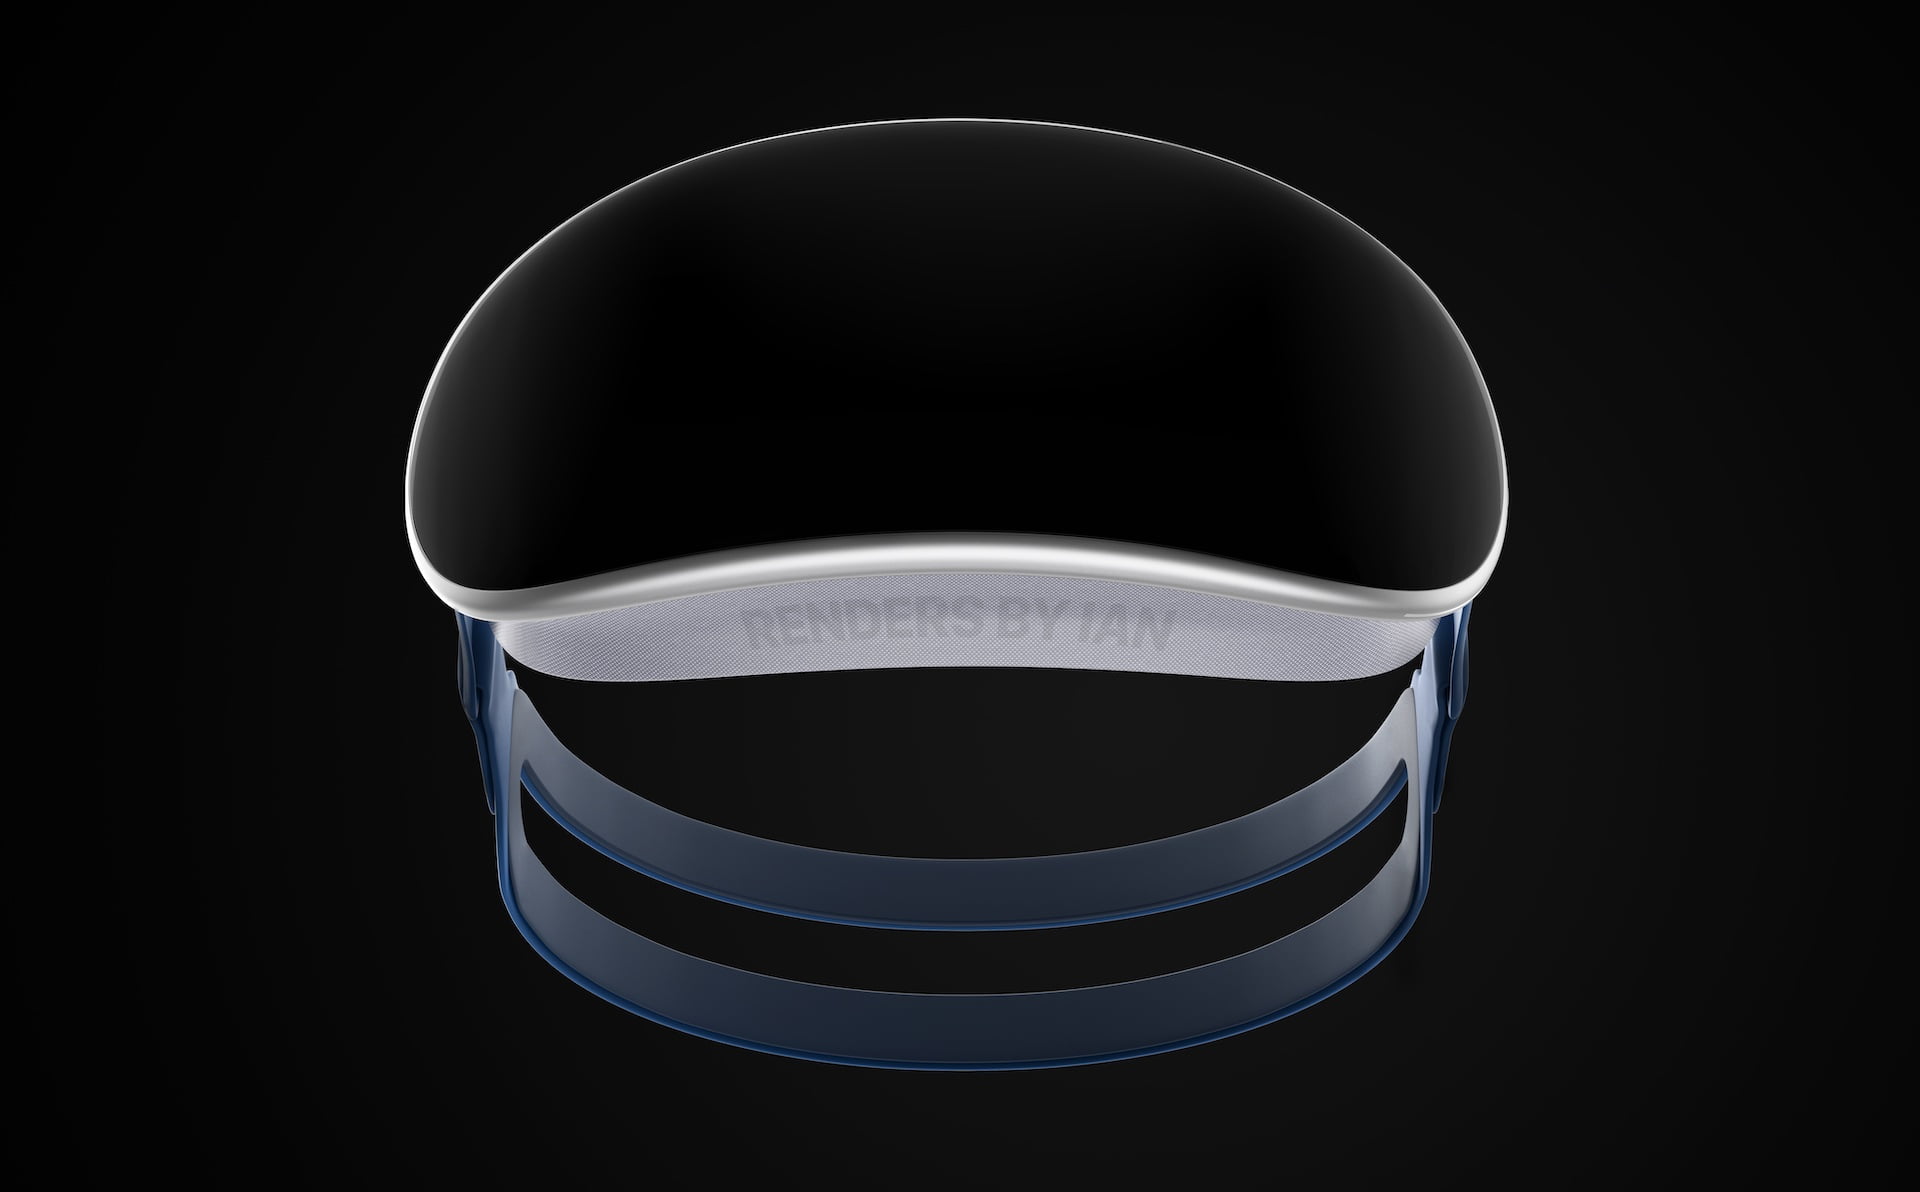 Apple's mixed-reality headset could feature very expensive displays